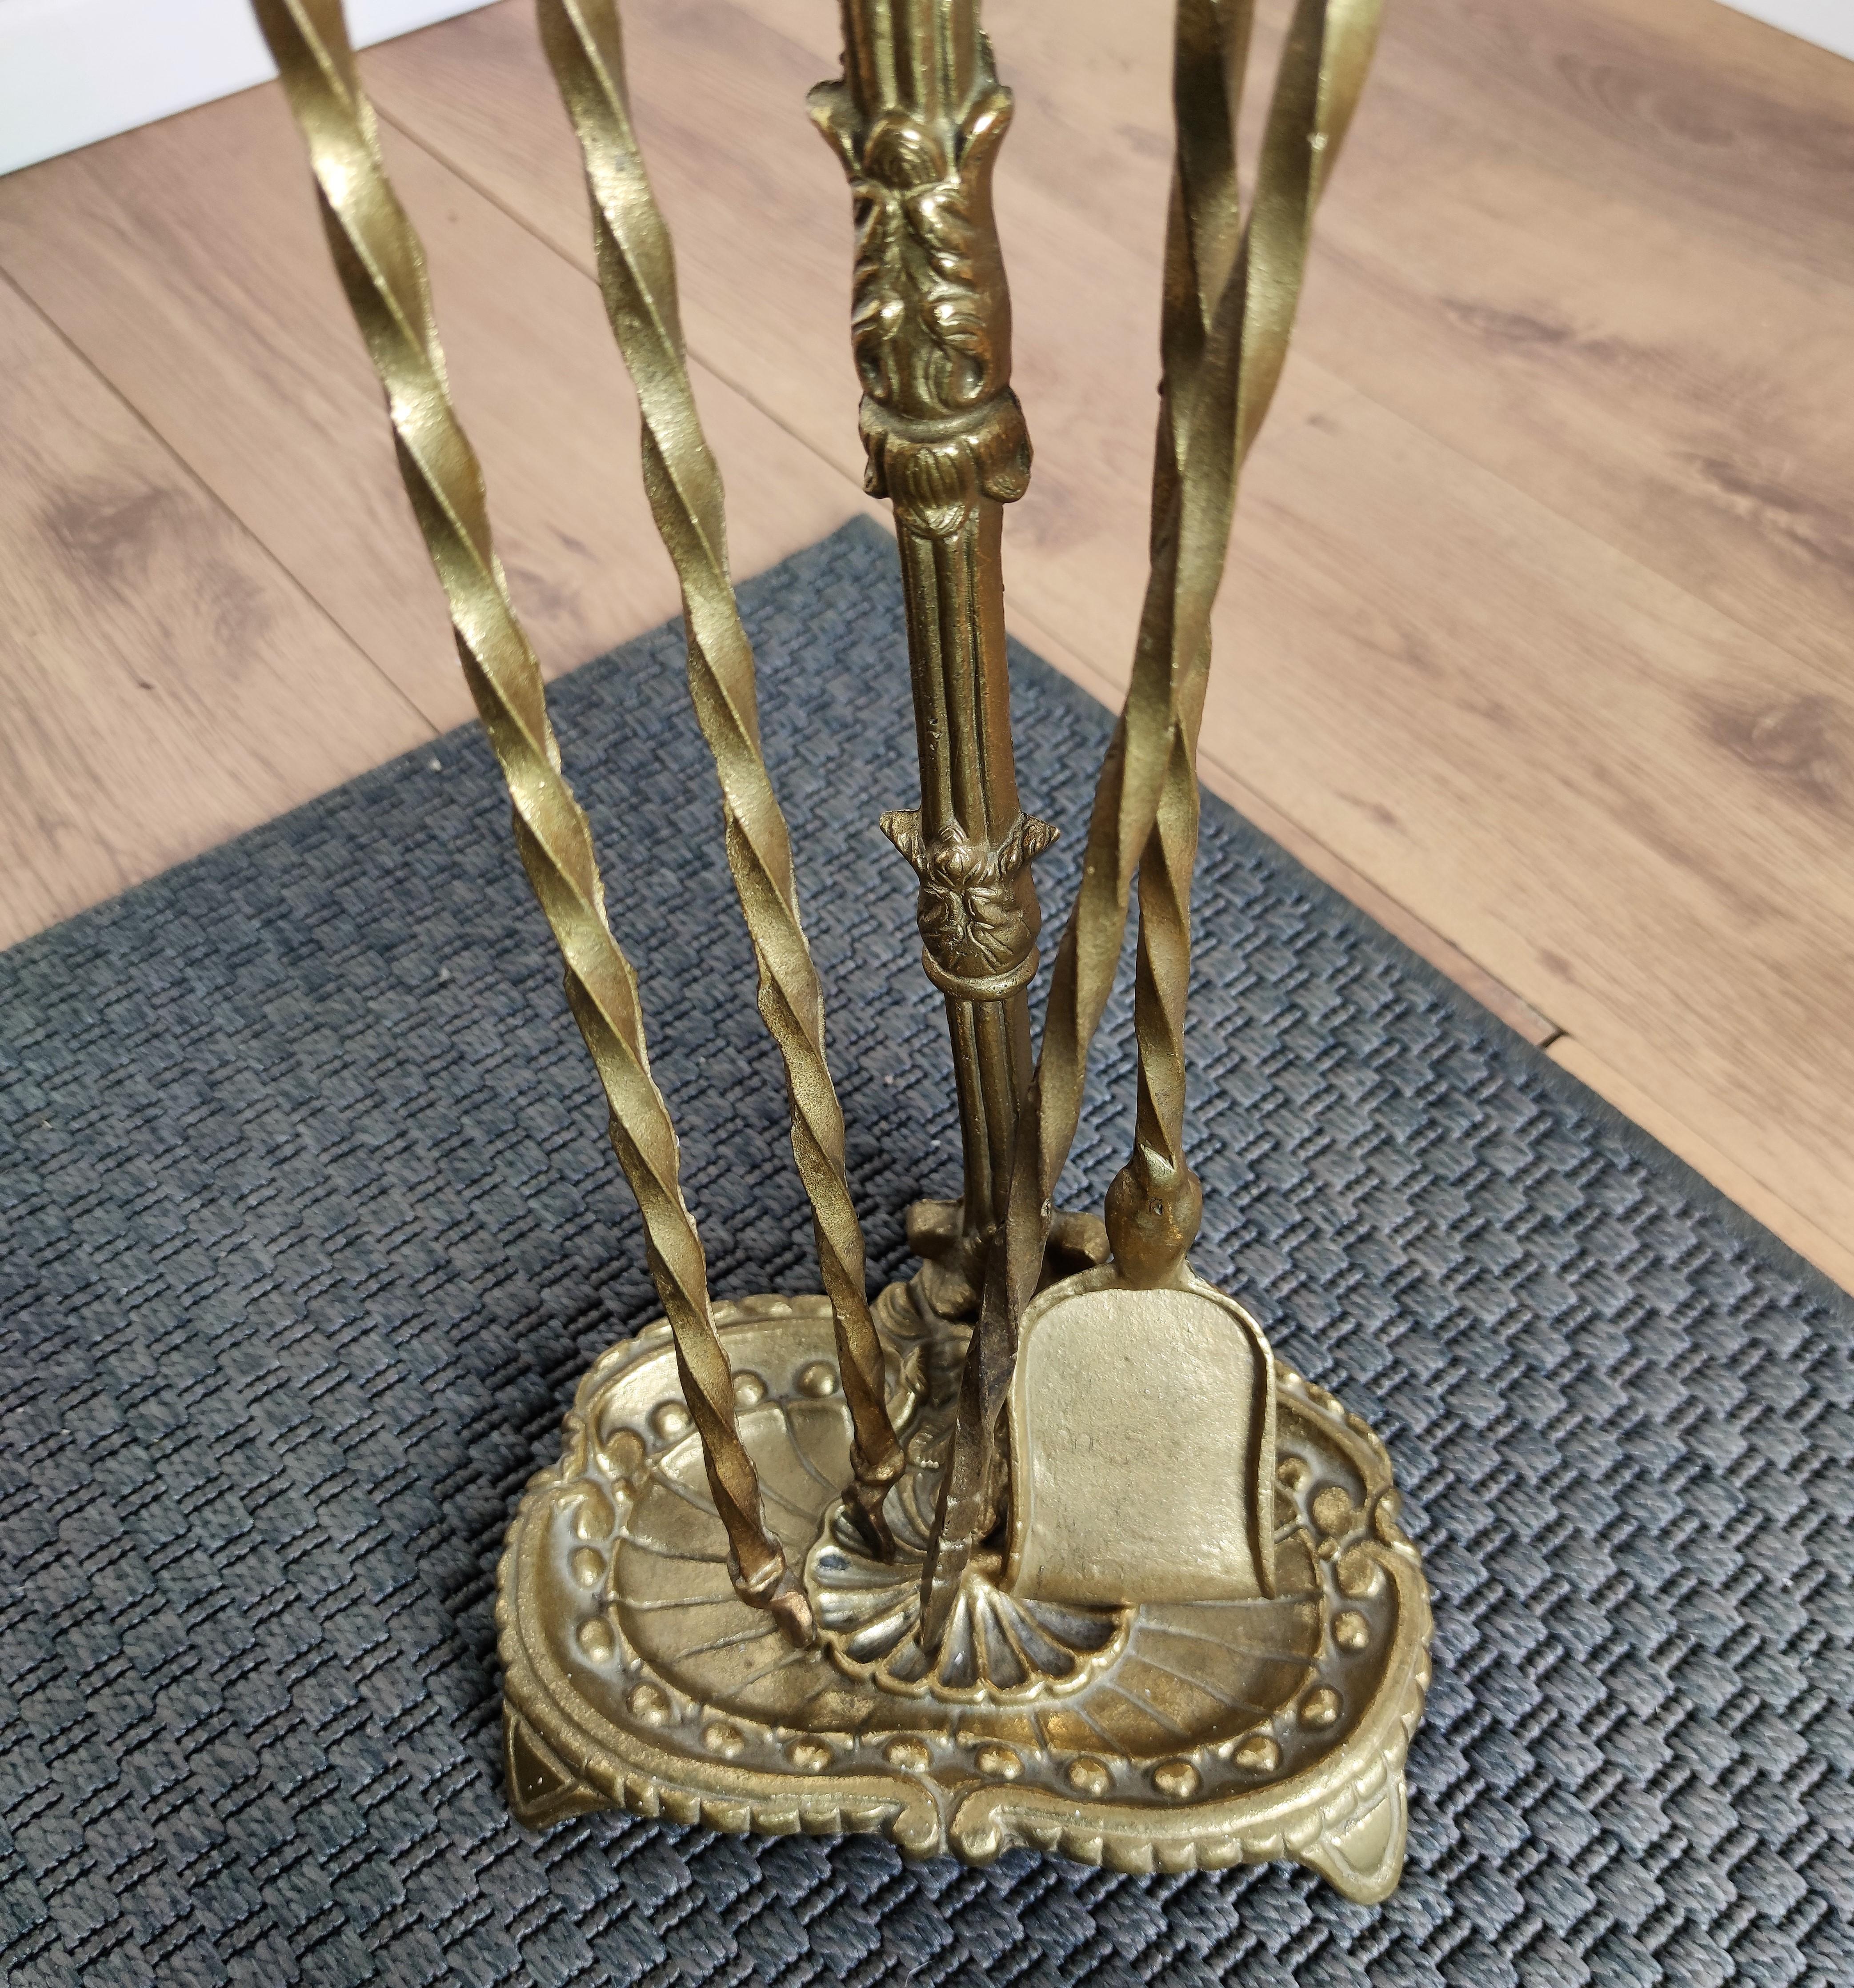 20th Century 1960s Italian Three-Piece Brass Acorn Ornated Vintage Fire Tool Set with Stand